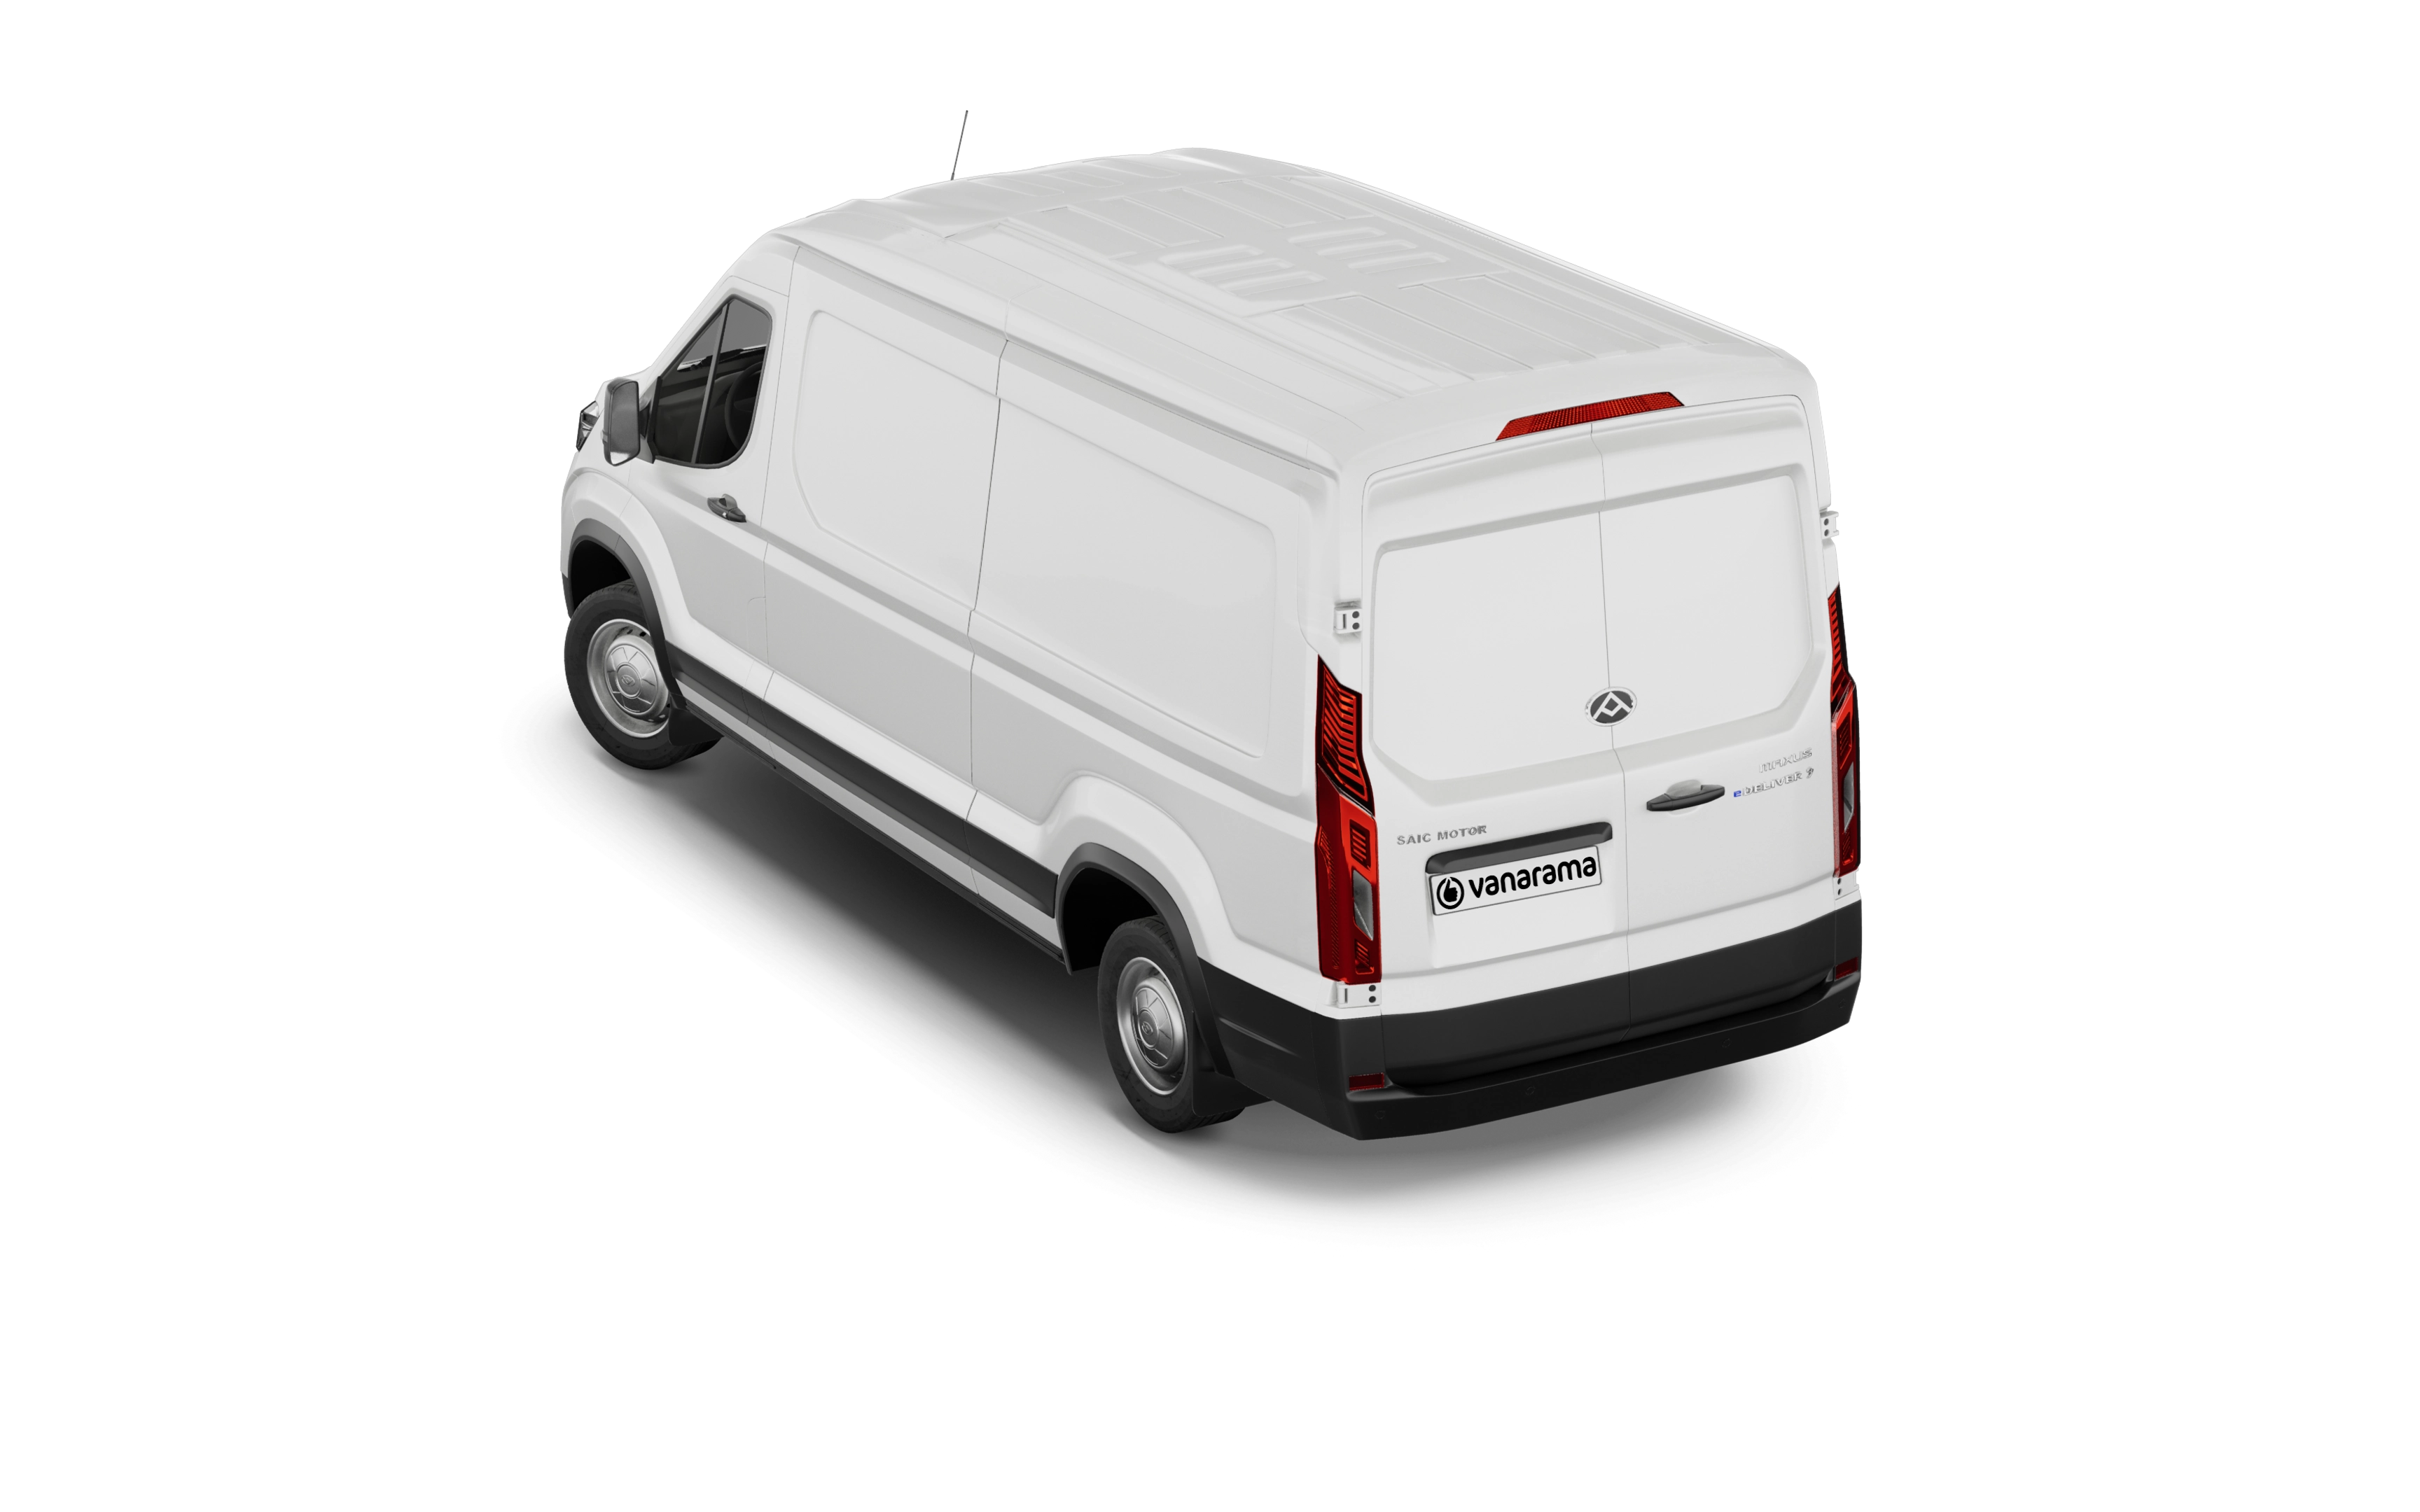 Maxus e deliver 9 mwb electric fwd 150kw high roof van 72kwh auto